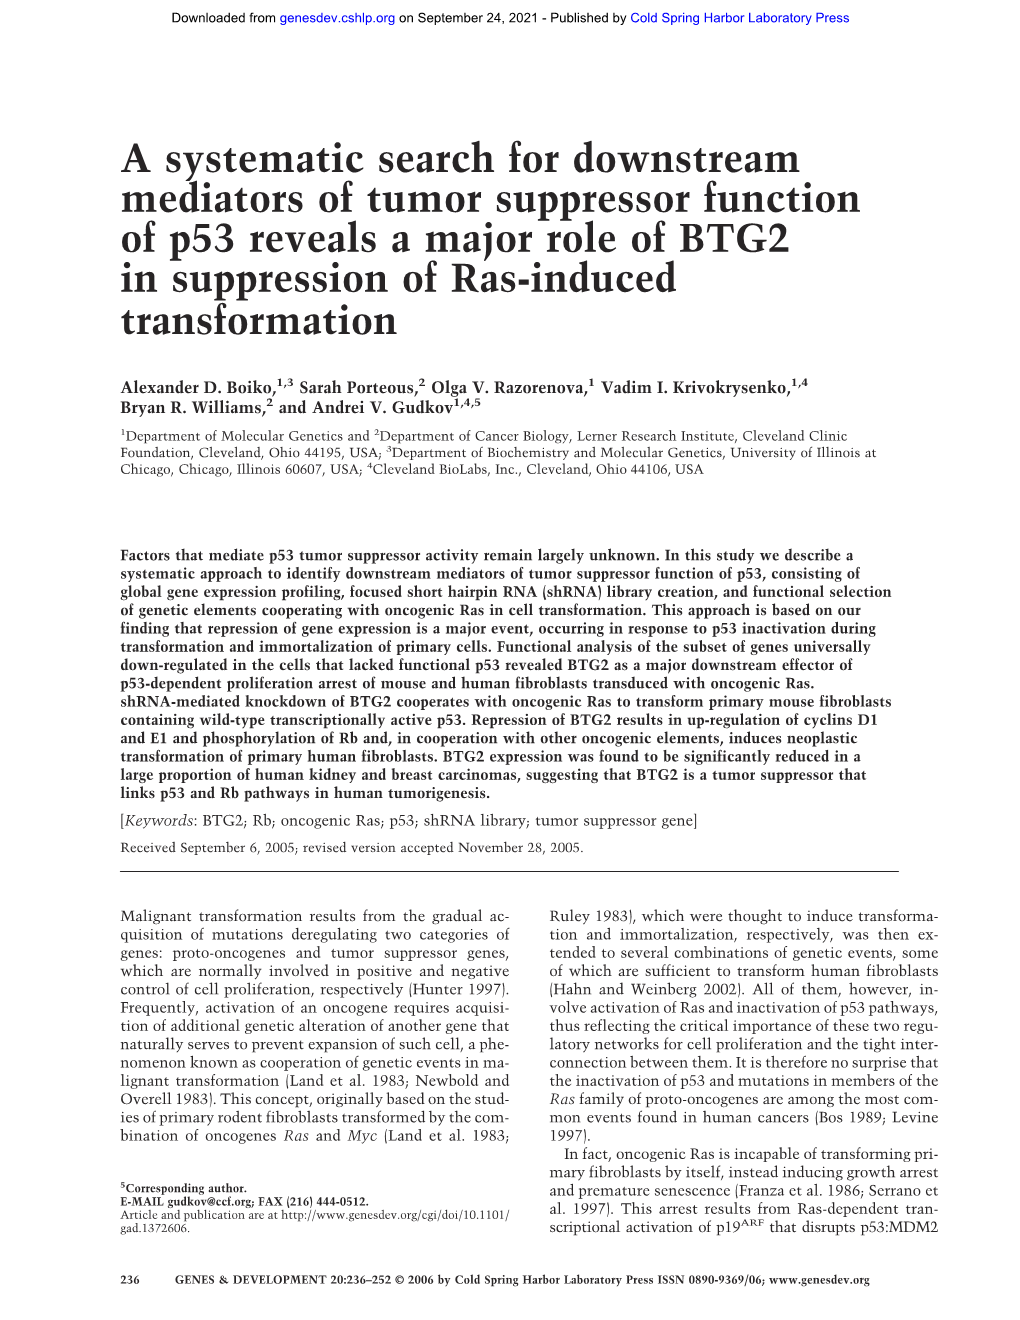 A Systematic Search for Downstream Mediators of Tumor Suppressor Function of P53 Reveals a Major Role of BTG2 in Suppression of Ras-Induced Transformation